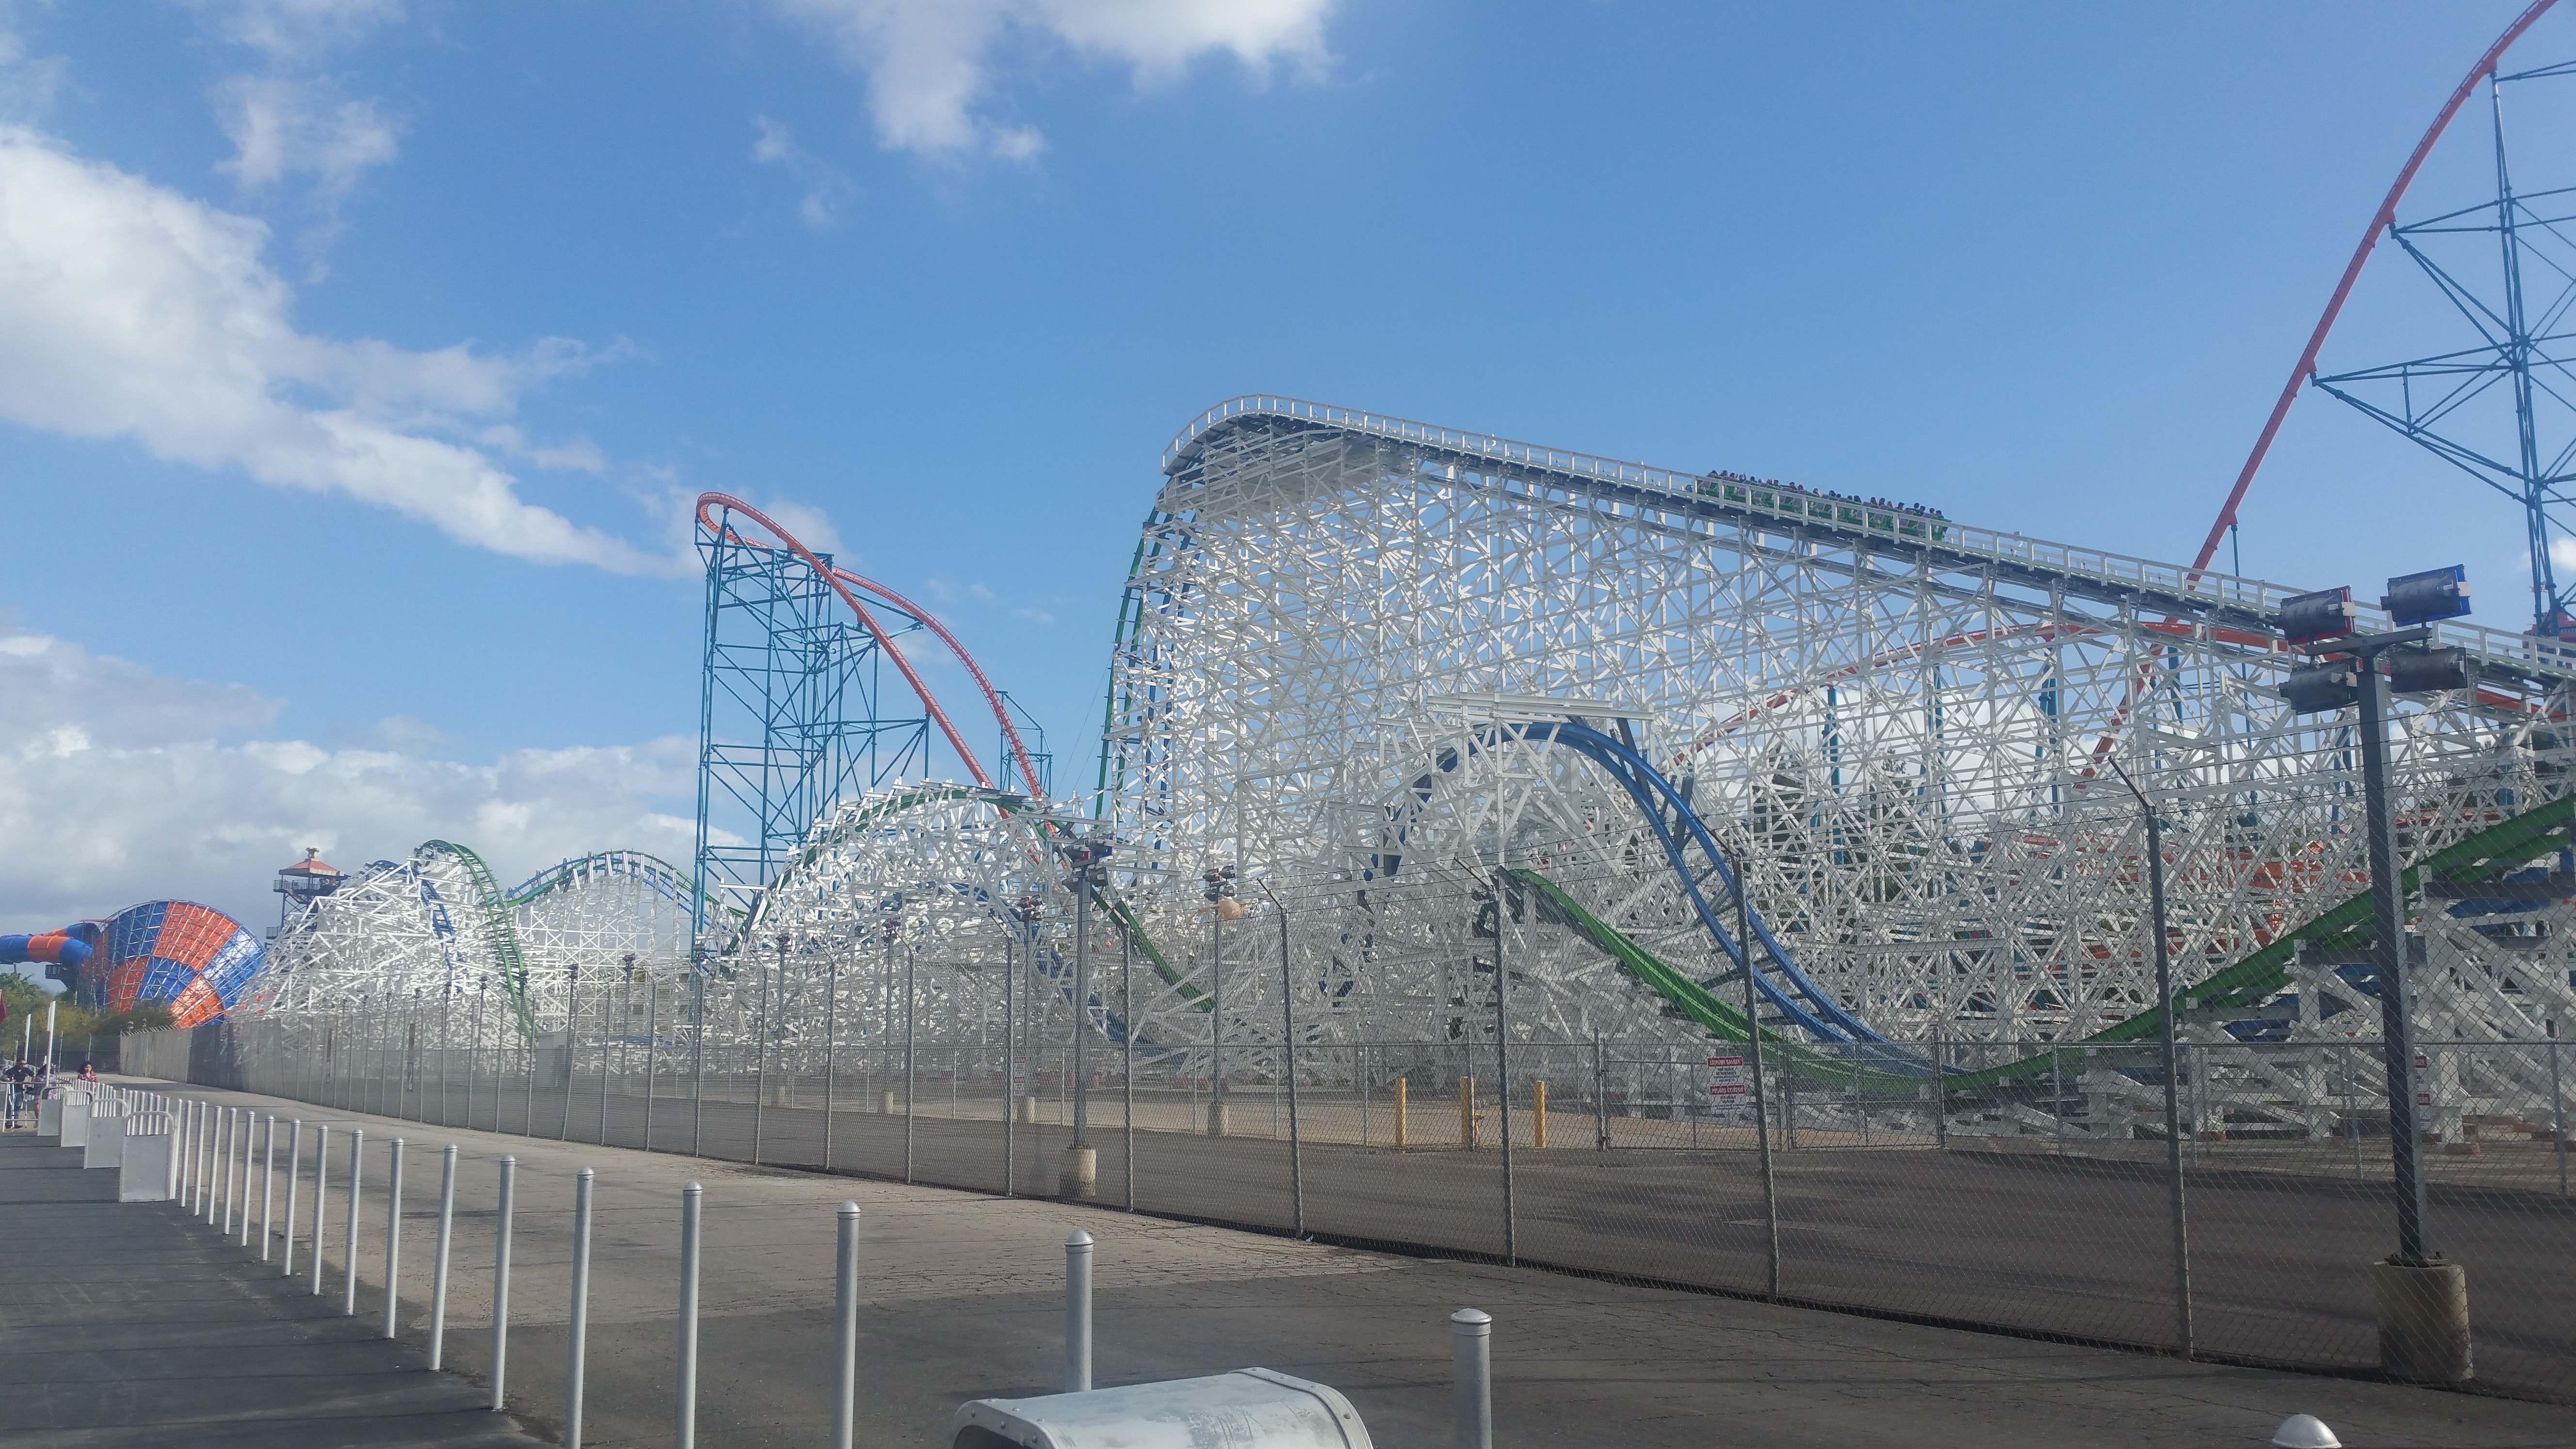 Twisted Colossus Wikipedia - riding fastest roller coaster in roblox point theme park 2